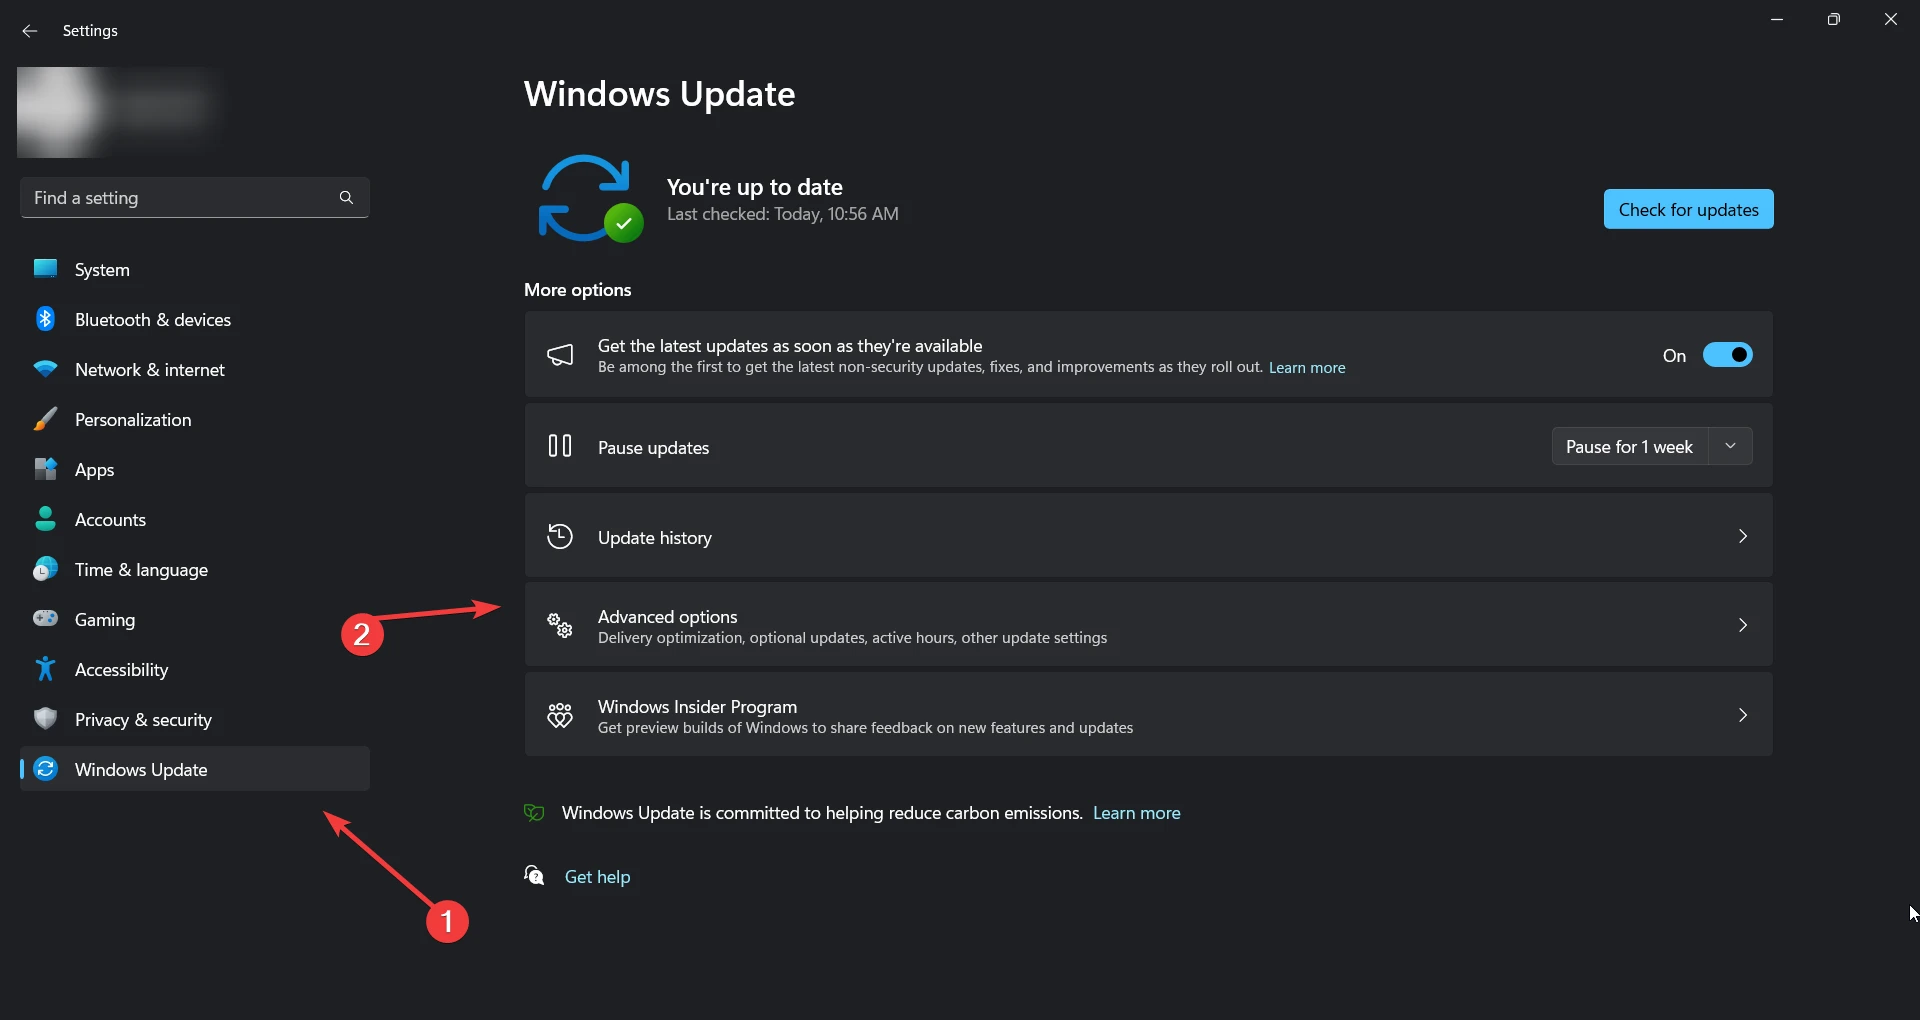 Windows Update and security option